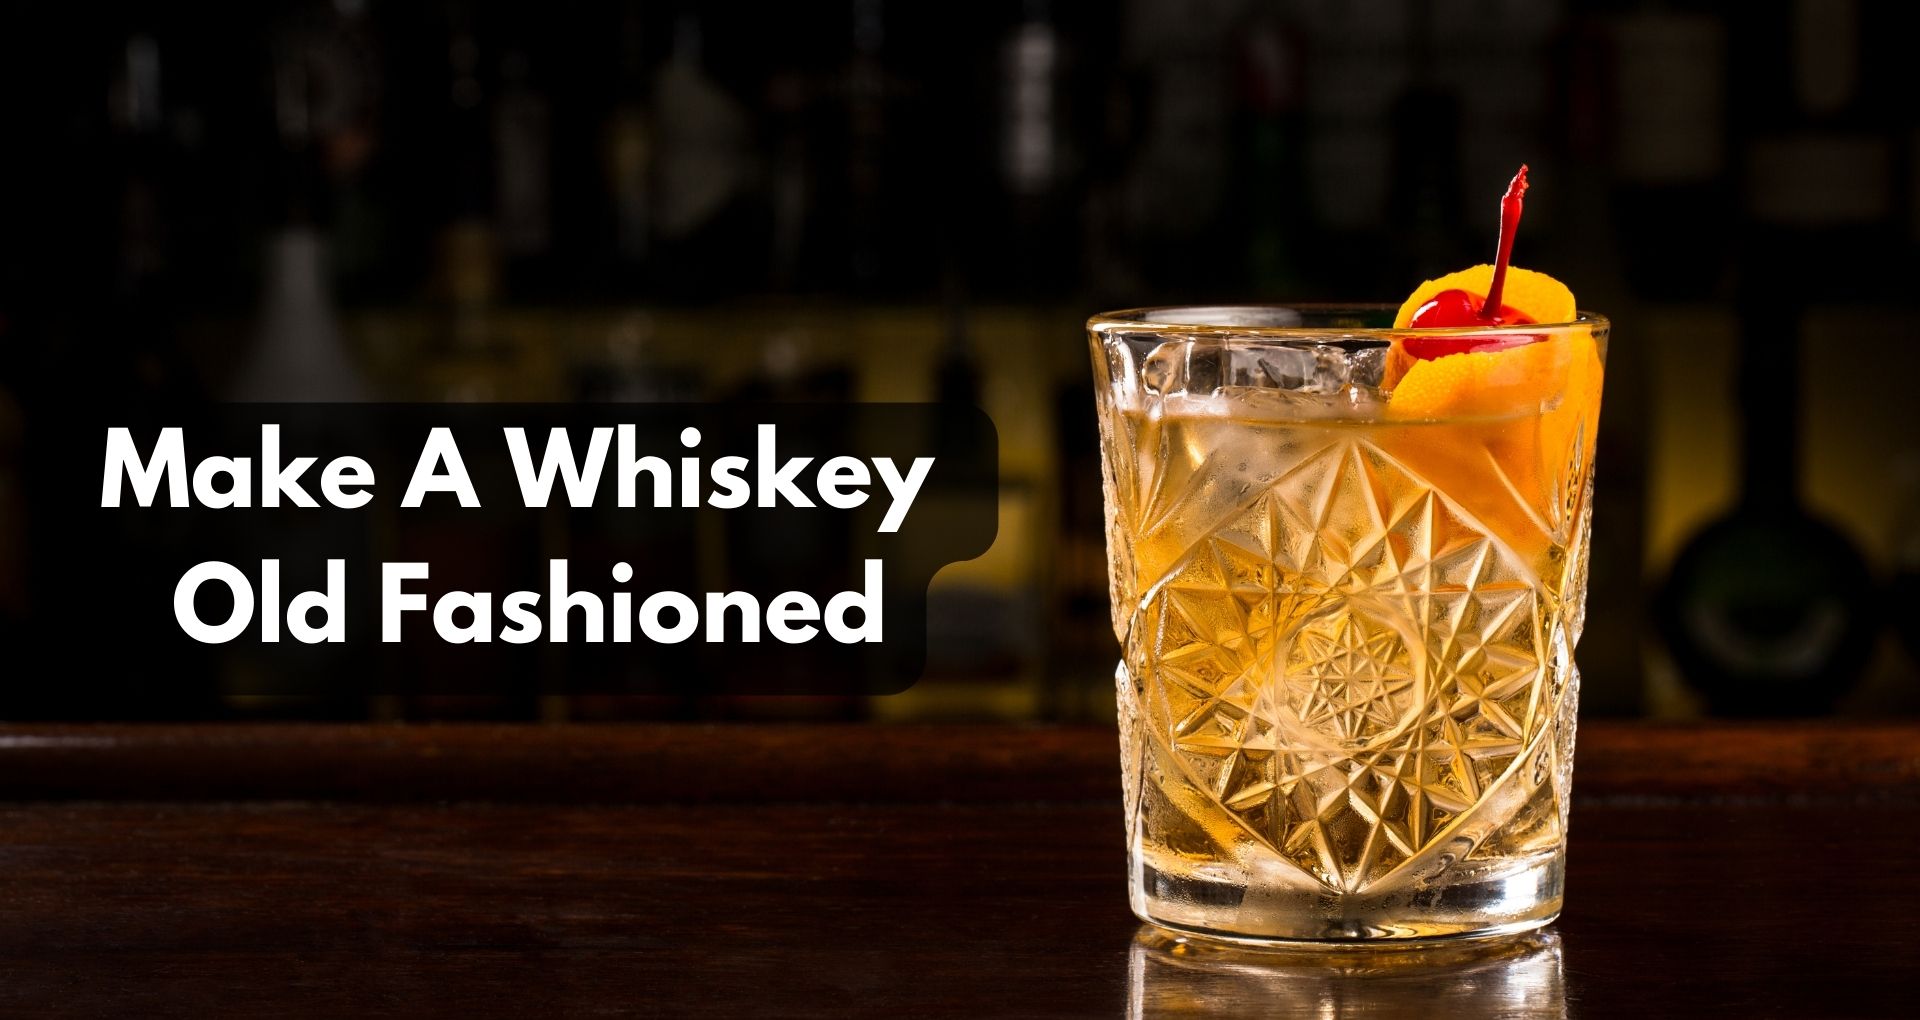 How To Make A Whiskey Old Fashioned?